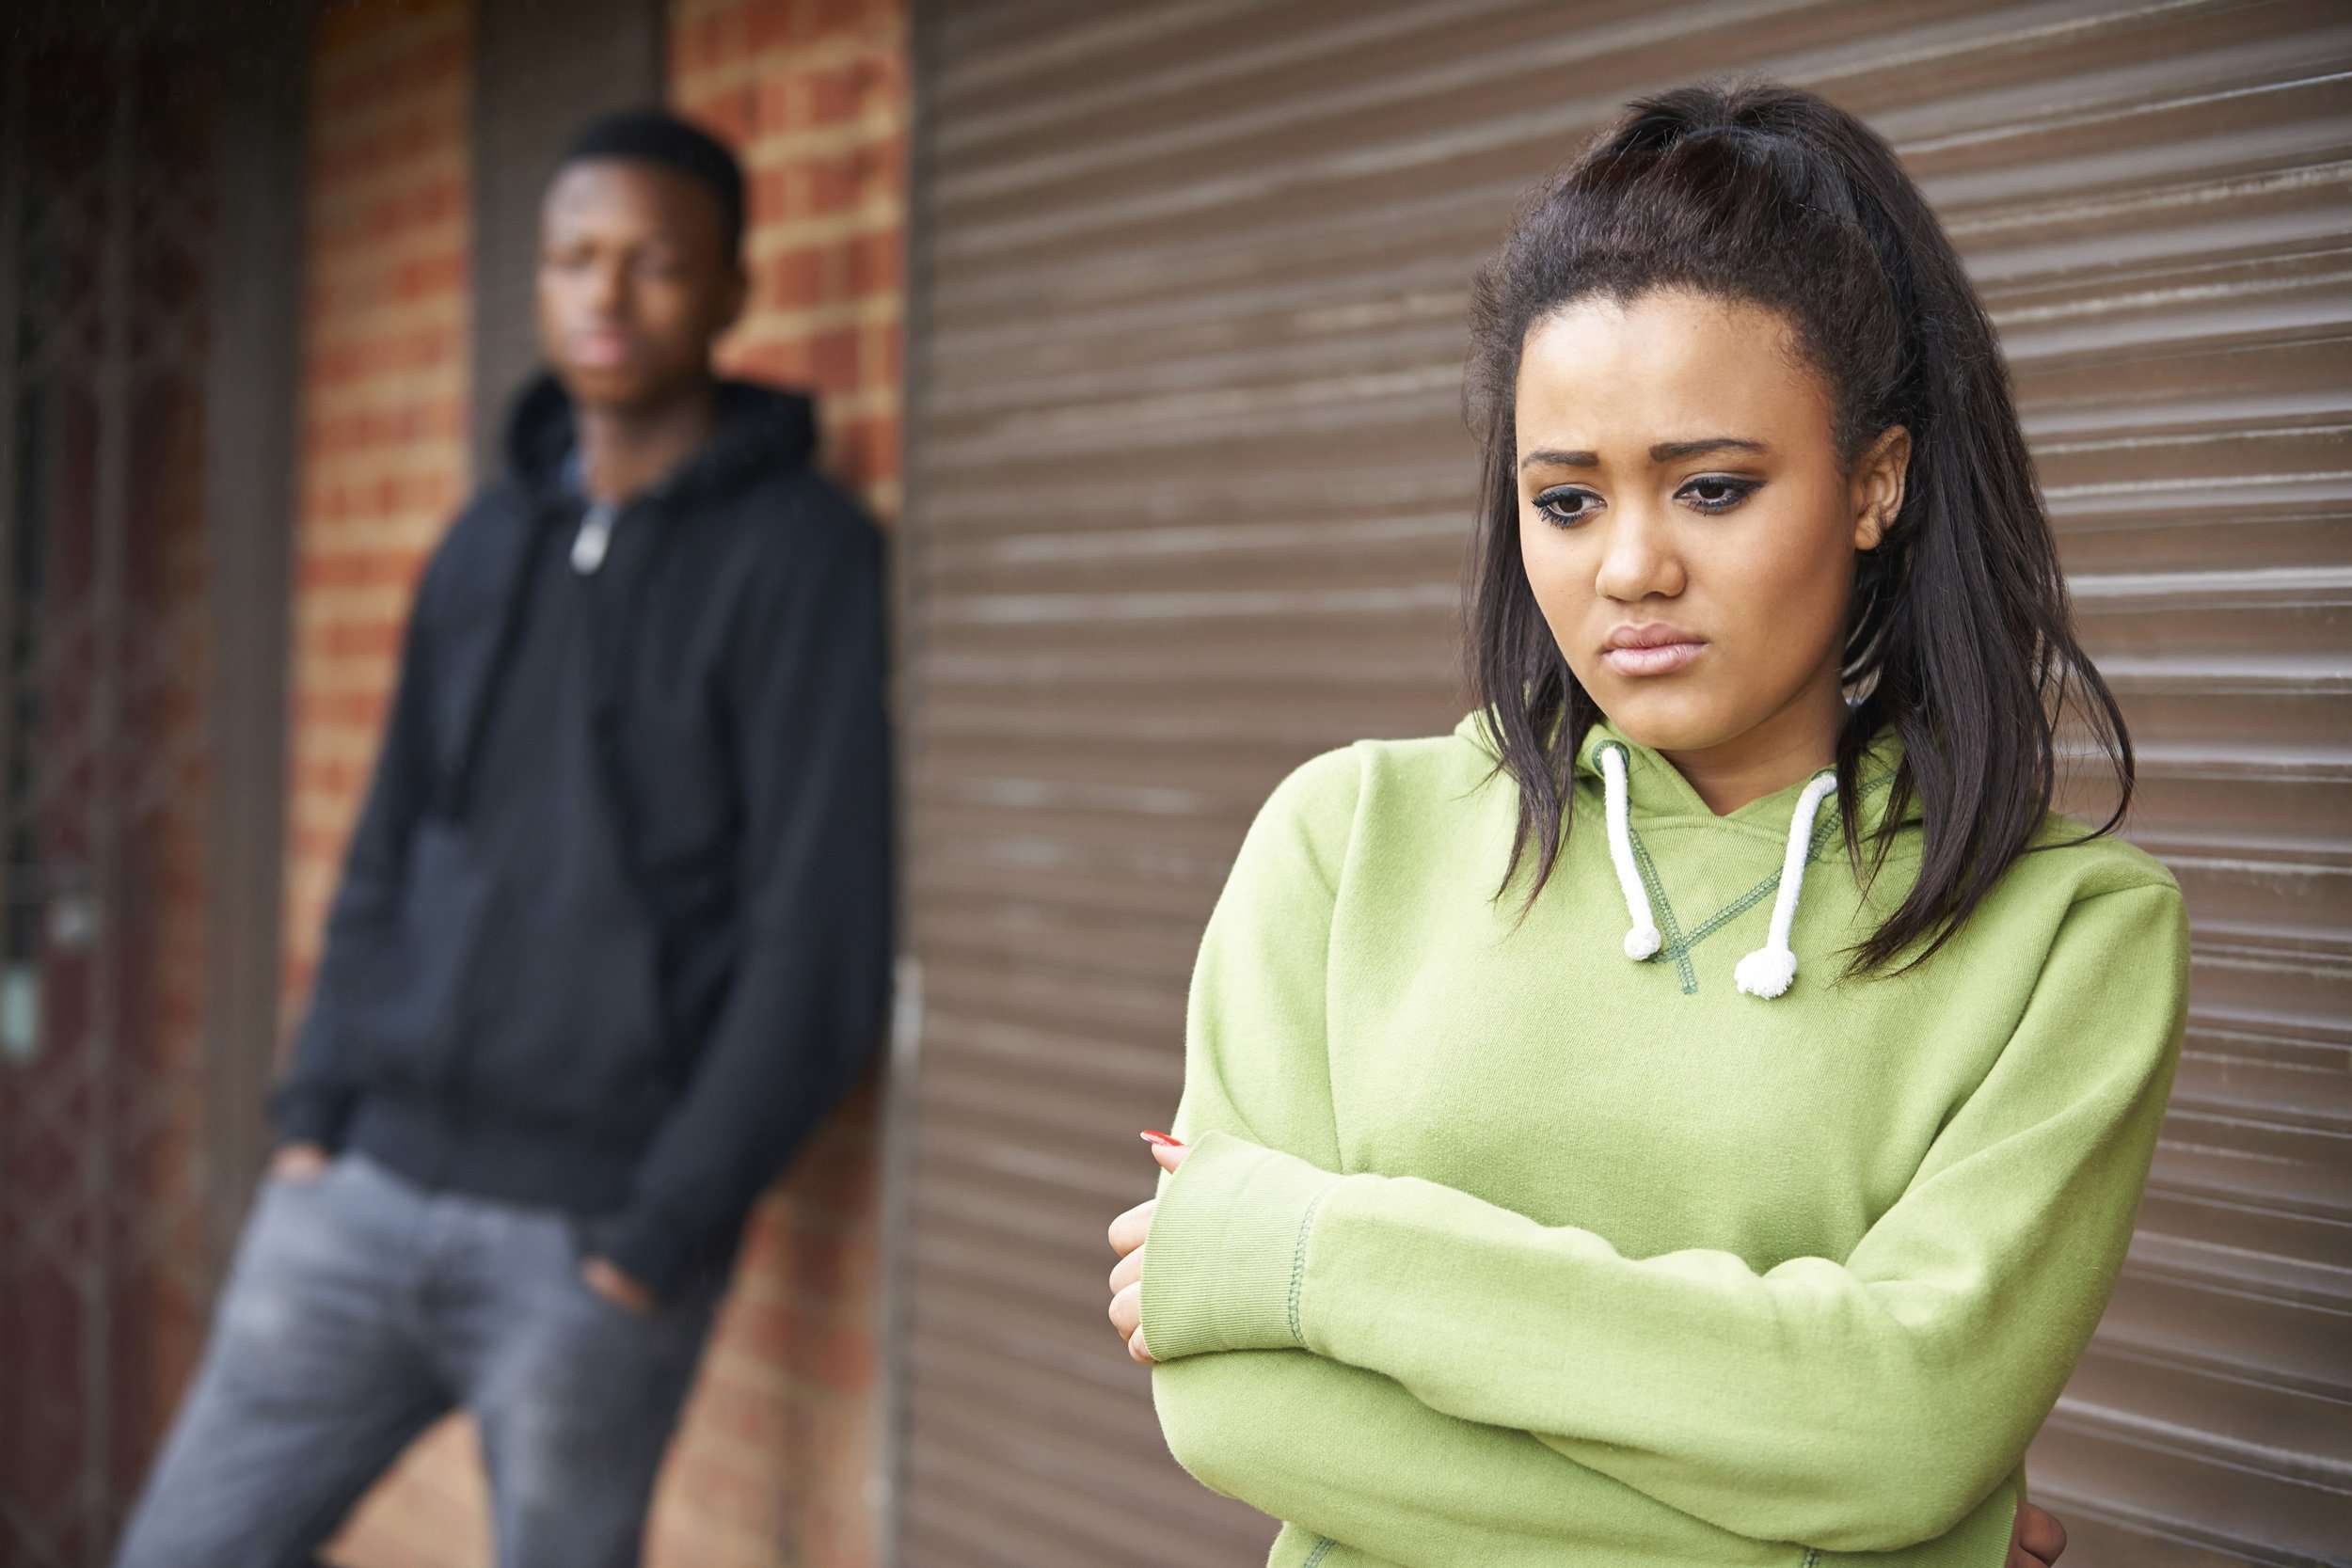 image for Teen dating violence is down, but boys still report more violence than girls